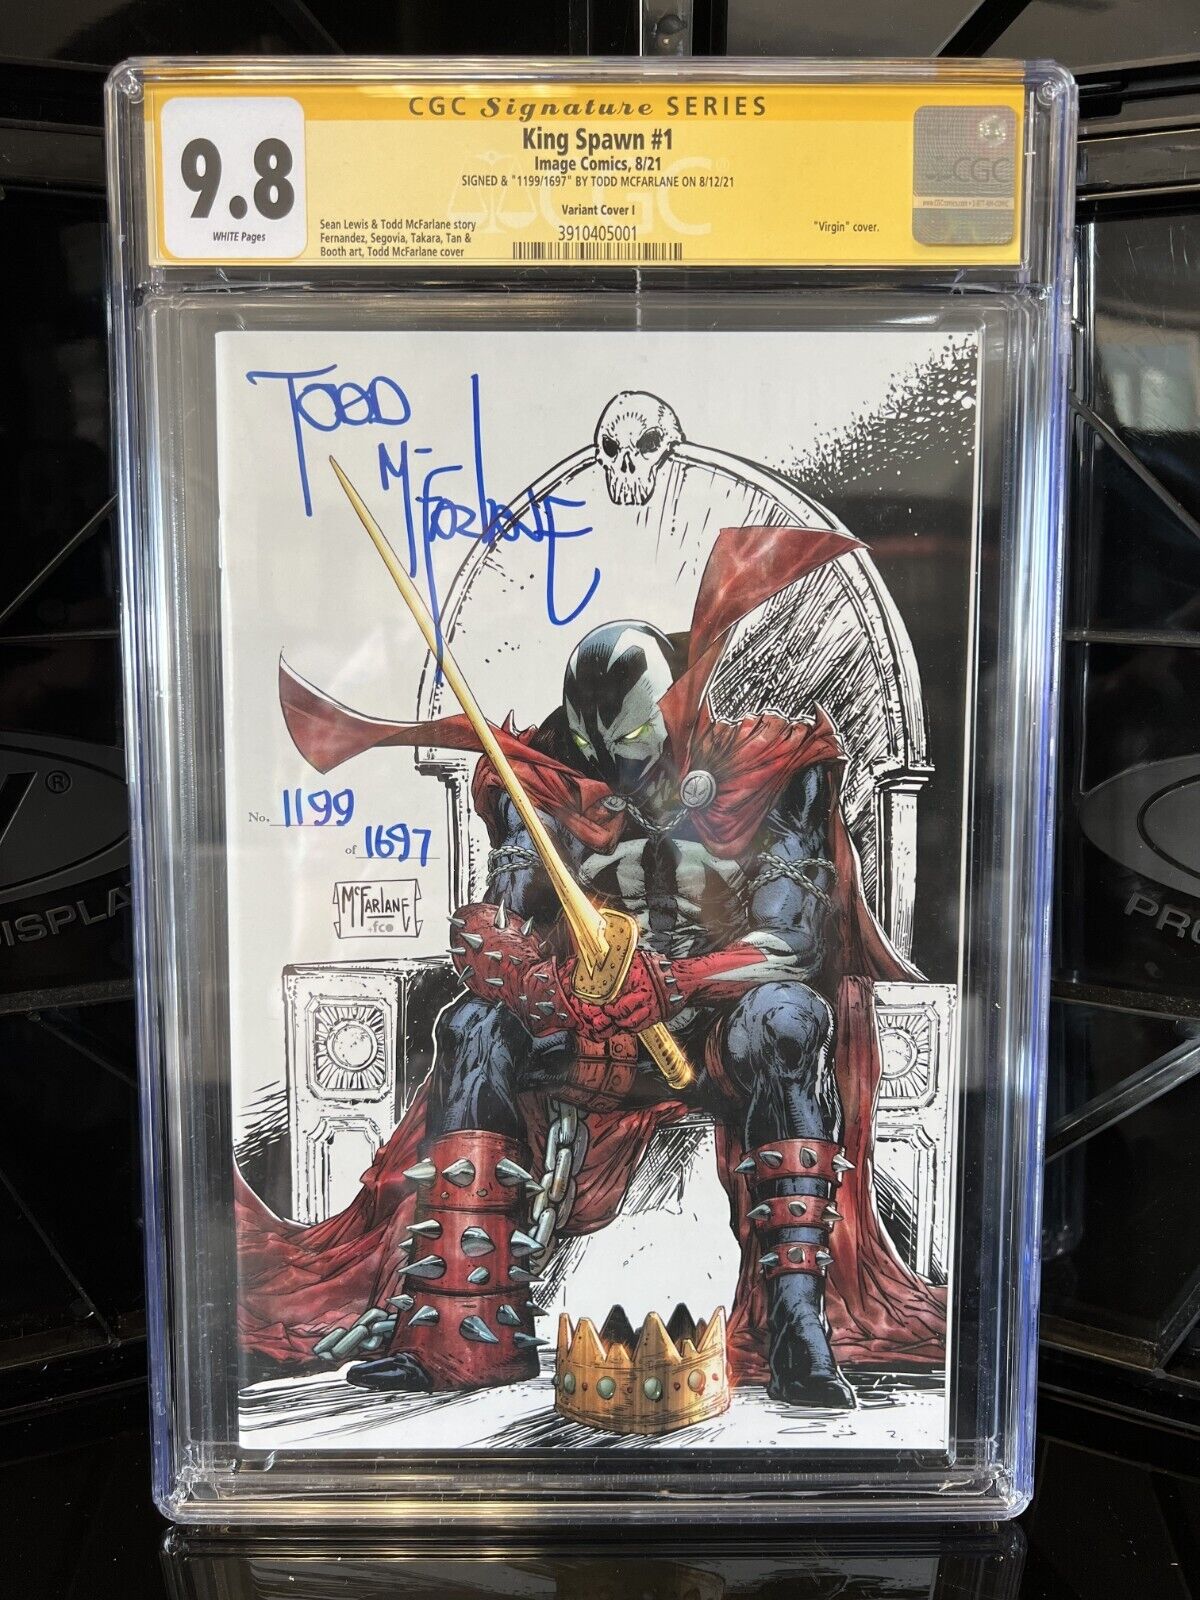 King Spawn #1 CGC SS 9.8 - Signed McFarlane 1199/1697 in BLUE - only 5 exist HTF